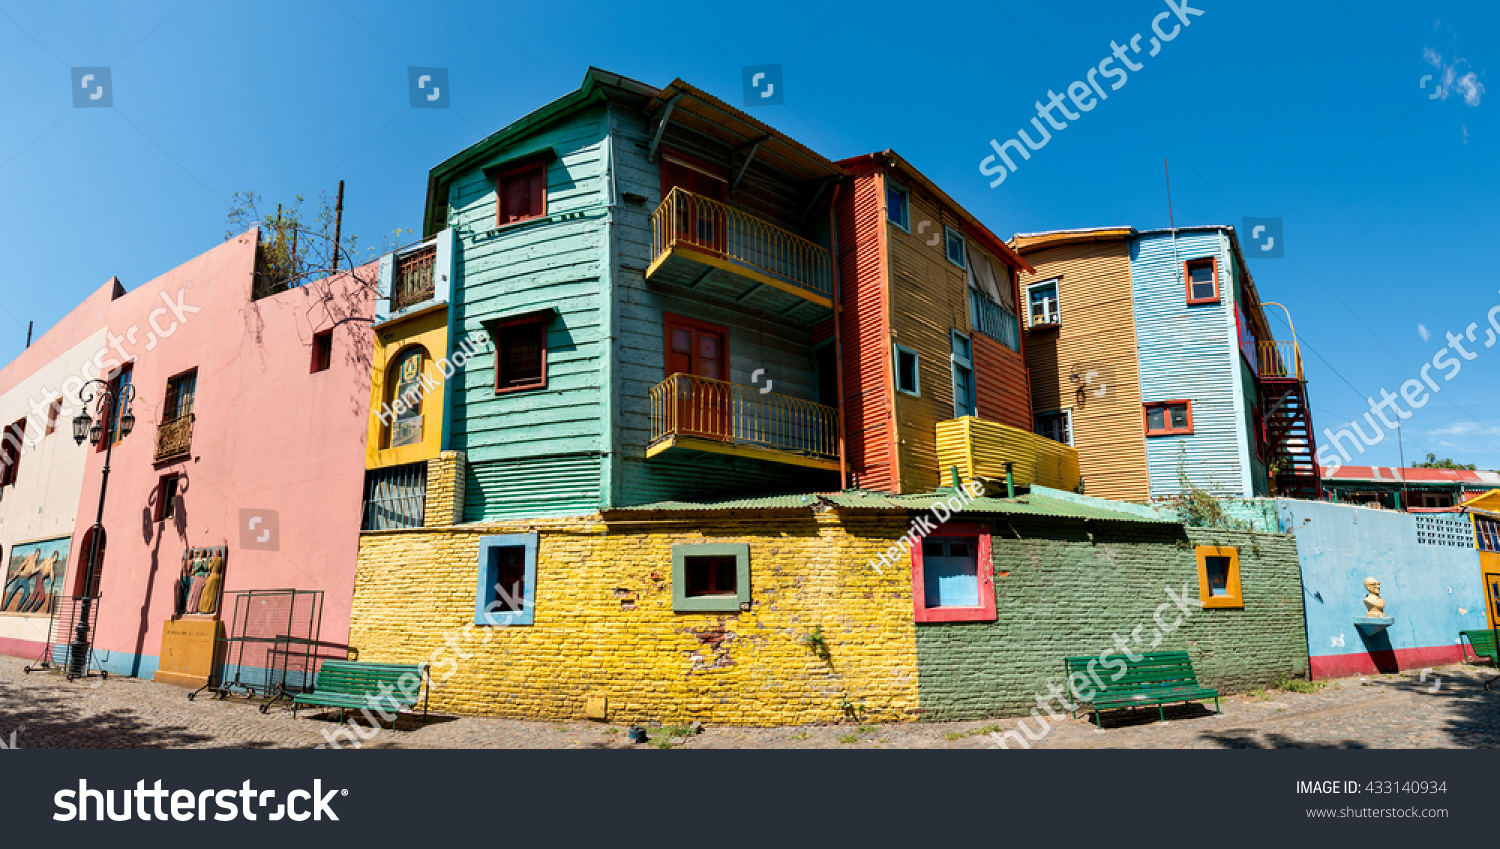 Panorama of the historic colorful neighborhood La Boca, Buenos Aires Argentine #433140934